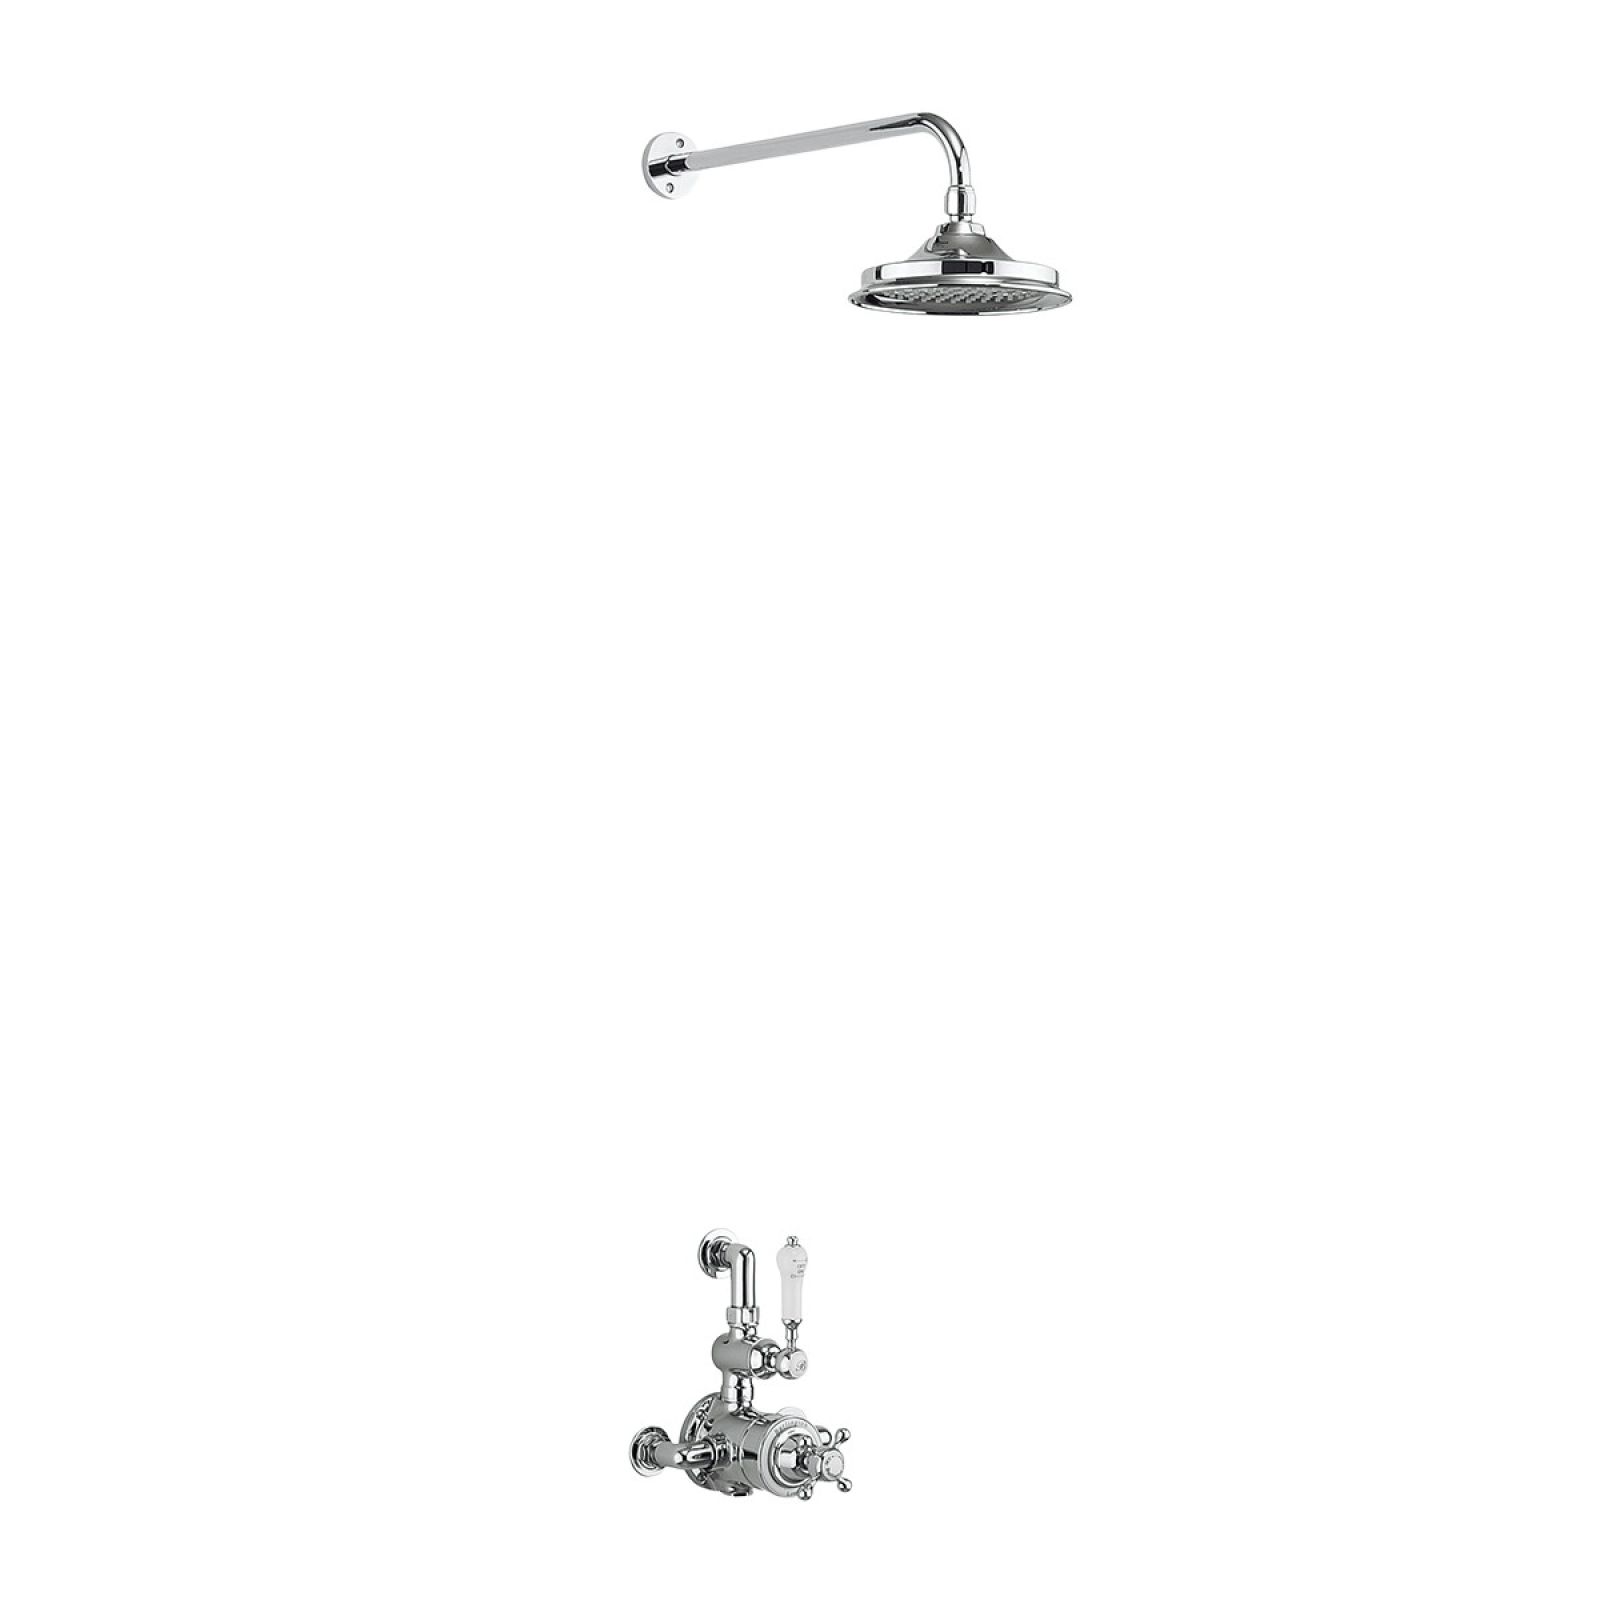 Bristol Thermostatic Exposed Shower Valve Single Outlet with Fixed Shower Arm with 6 inch rose